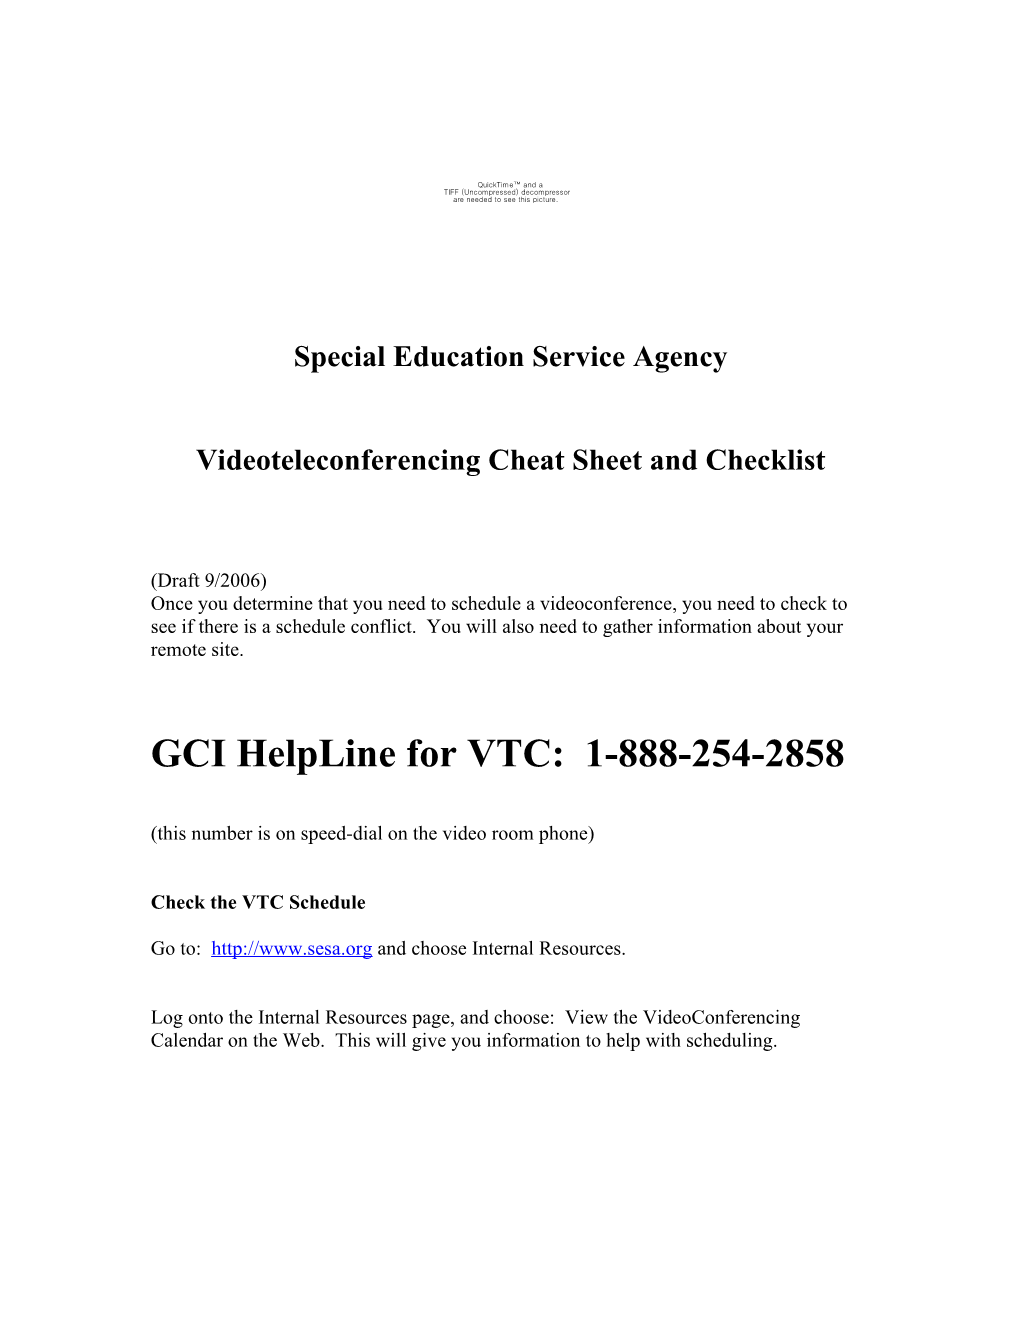 Videoteleconferencing Cheat Sheet and Checklist